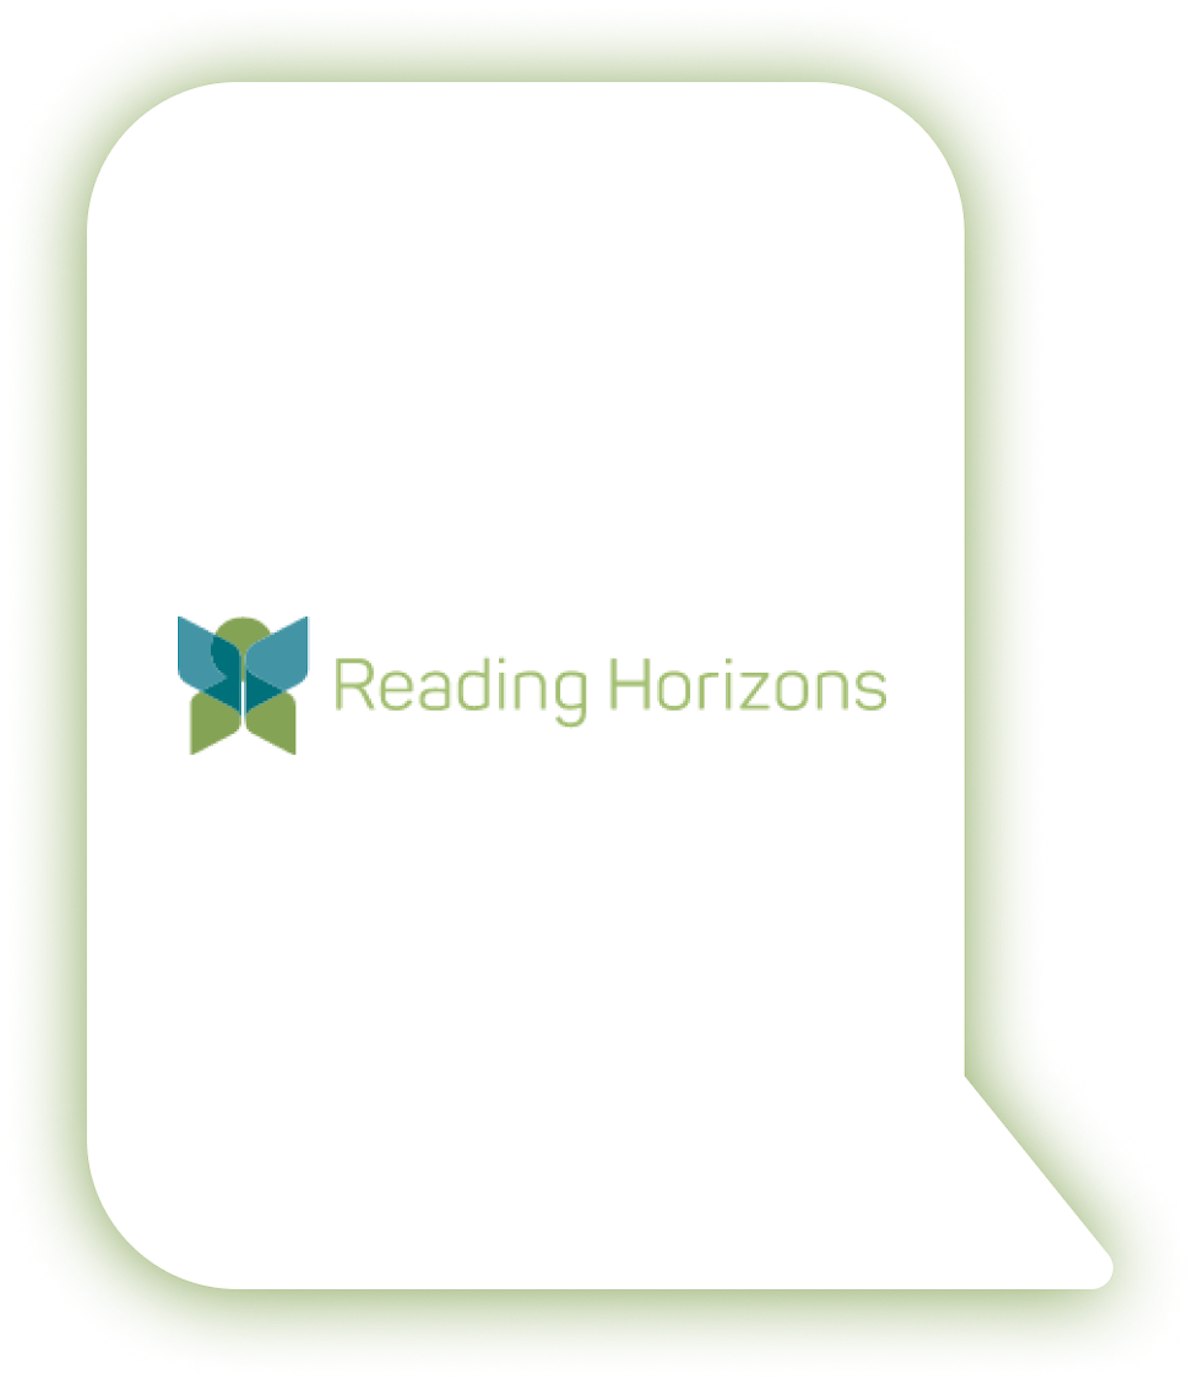 A multisensory, tech-enabled foundational reading curriculum based in the science of reading